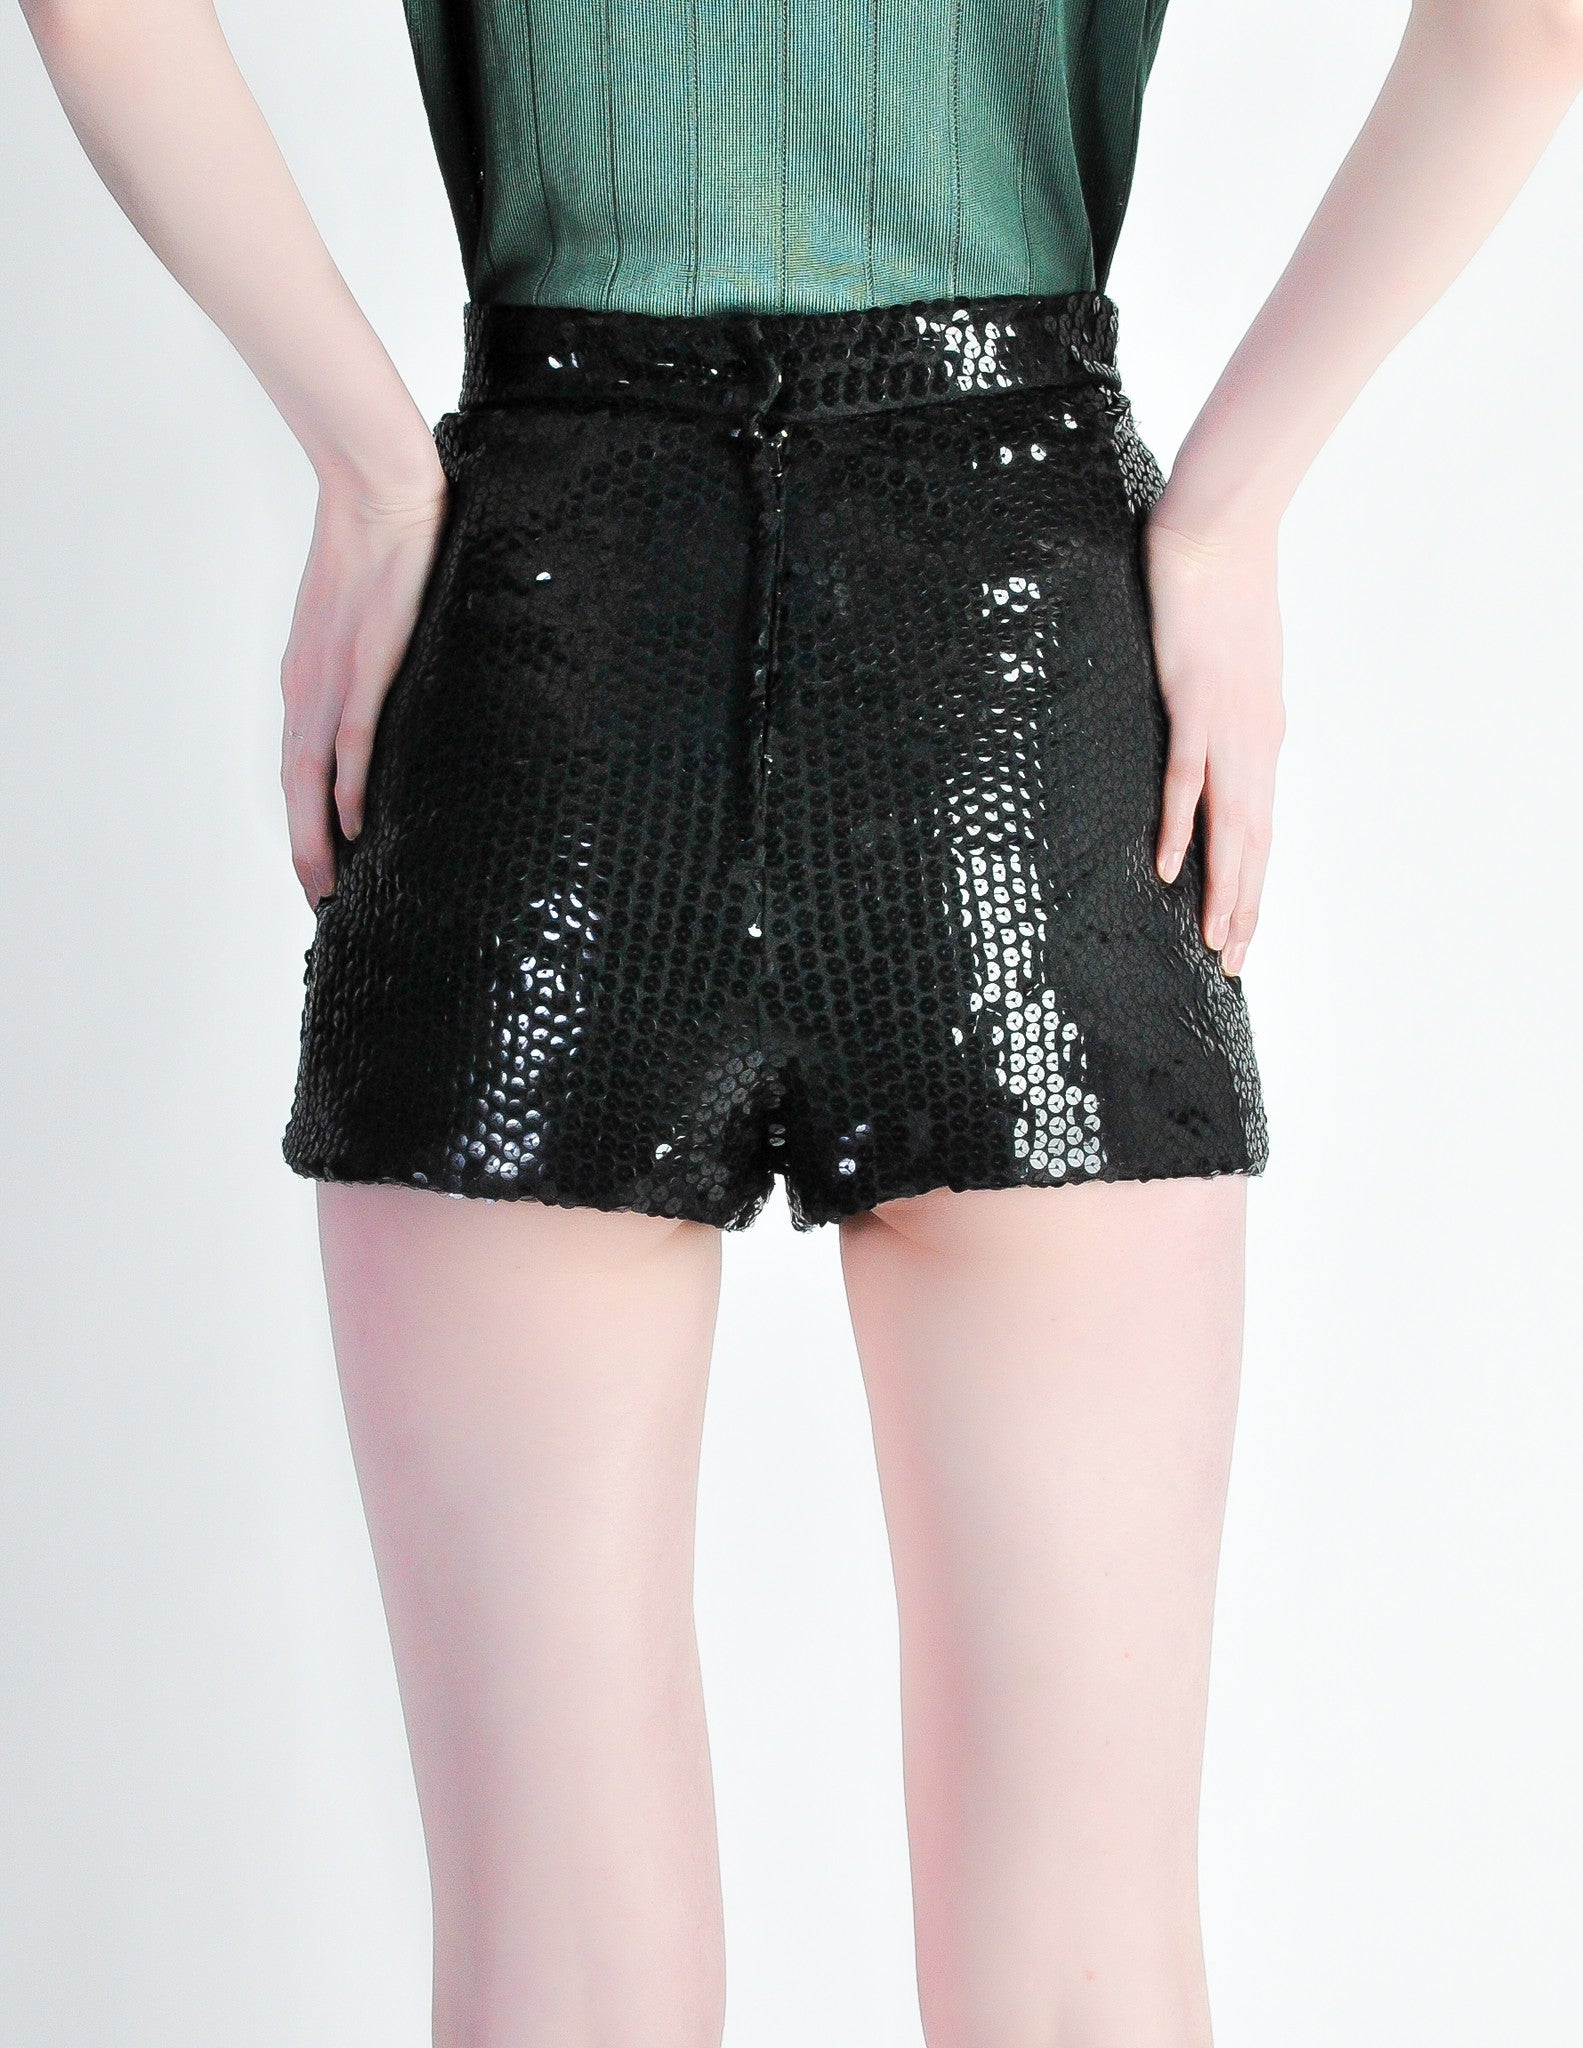 Vintage 1970s Black Sequin Hot Pant Shorts - from Amarcord Vintage Fashion